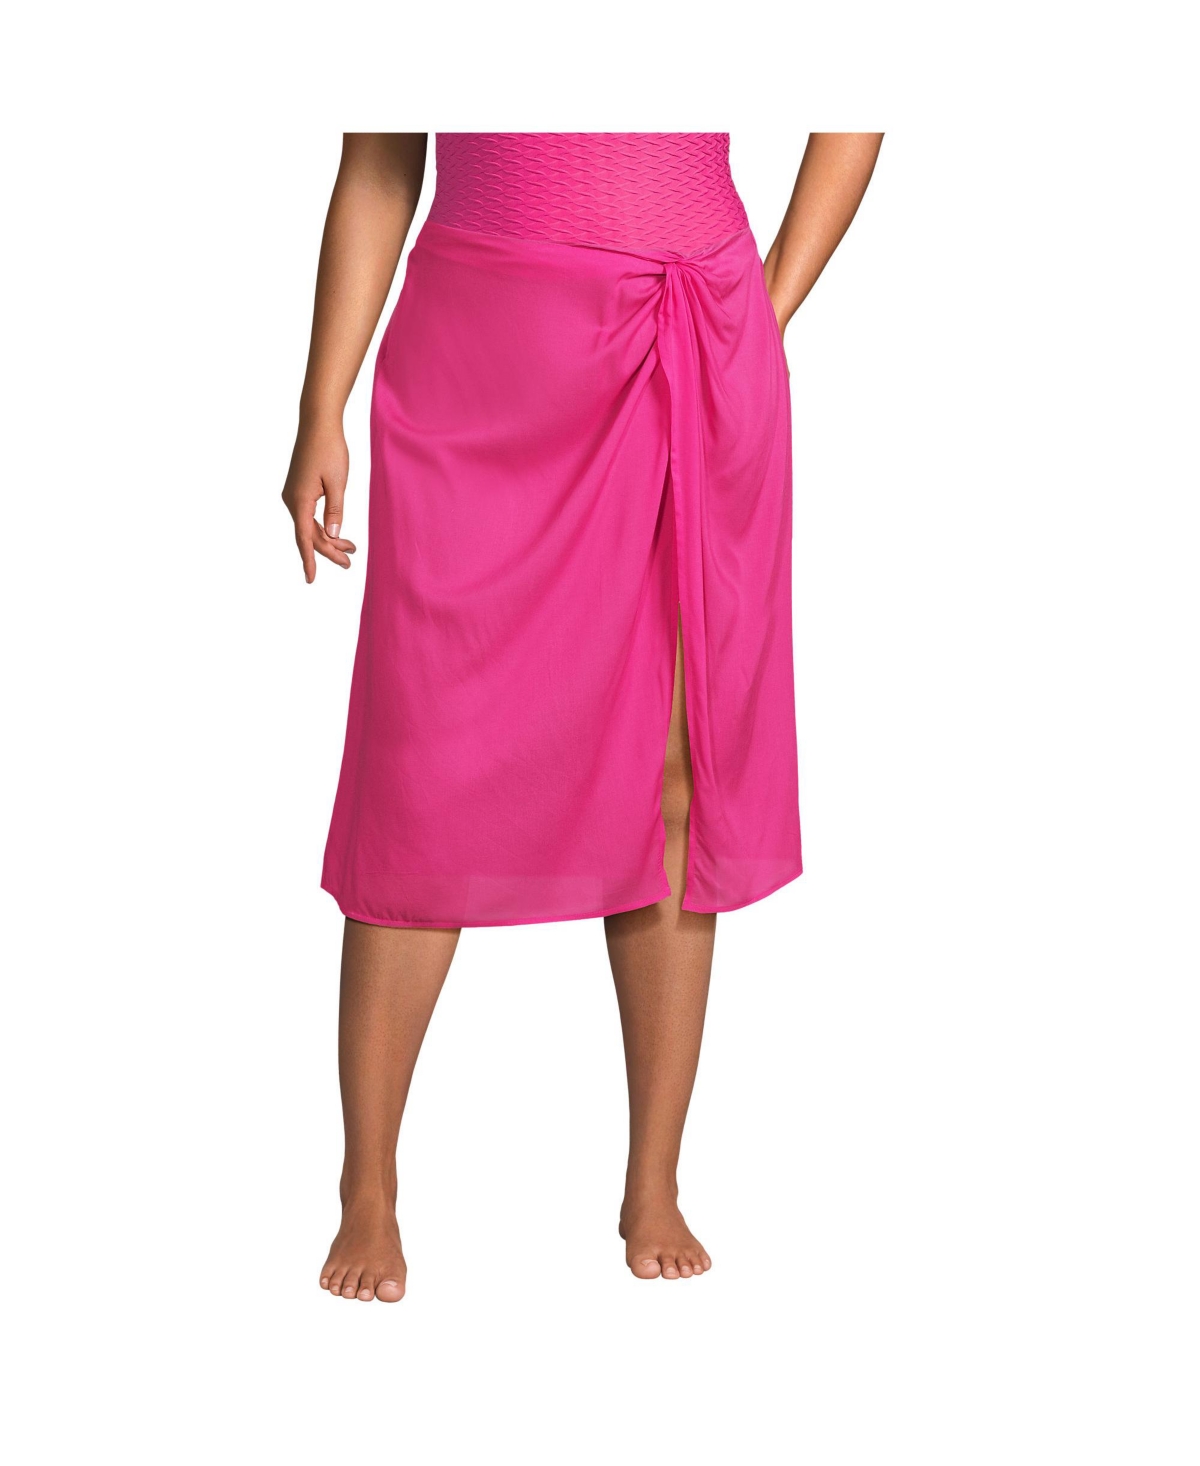 Plus Size Twist Front Knee Length Swim Cover-up Skirt - Prism pink